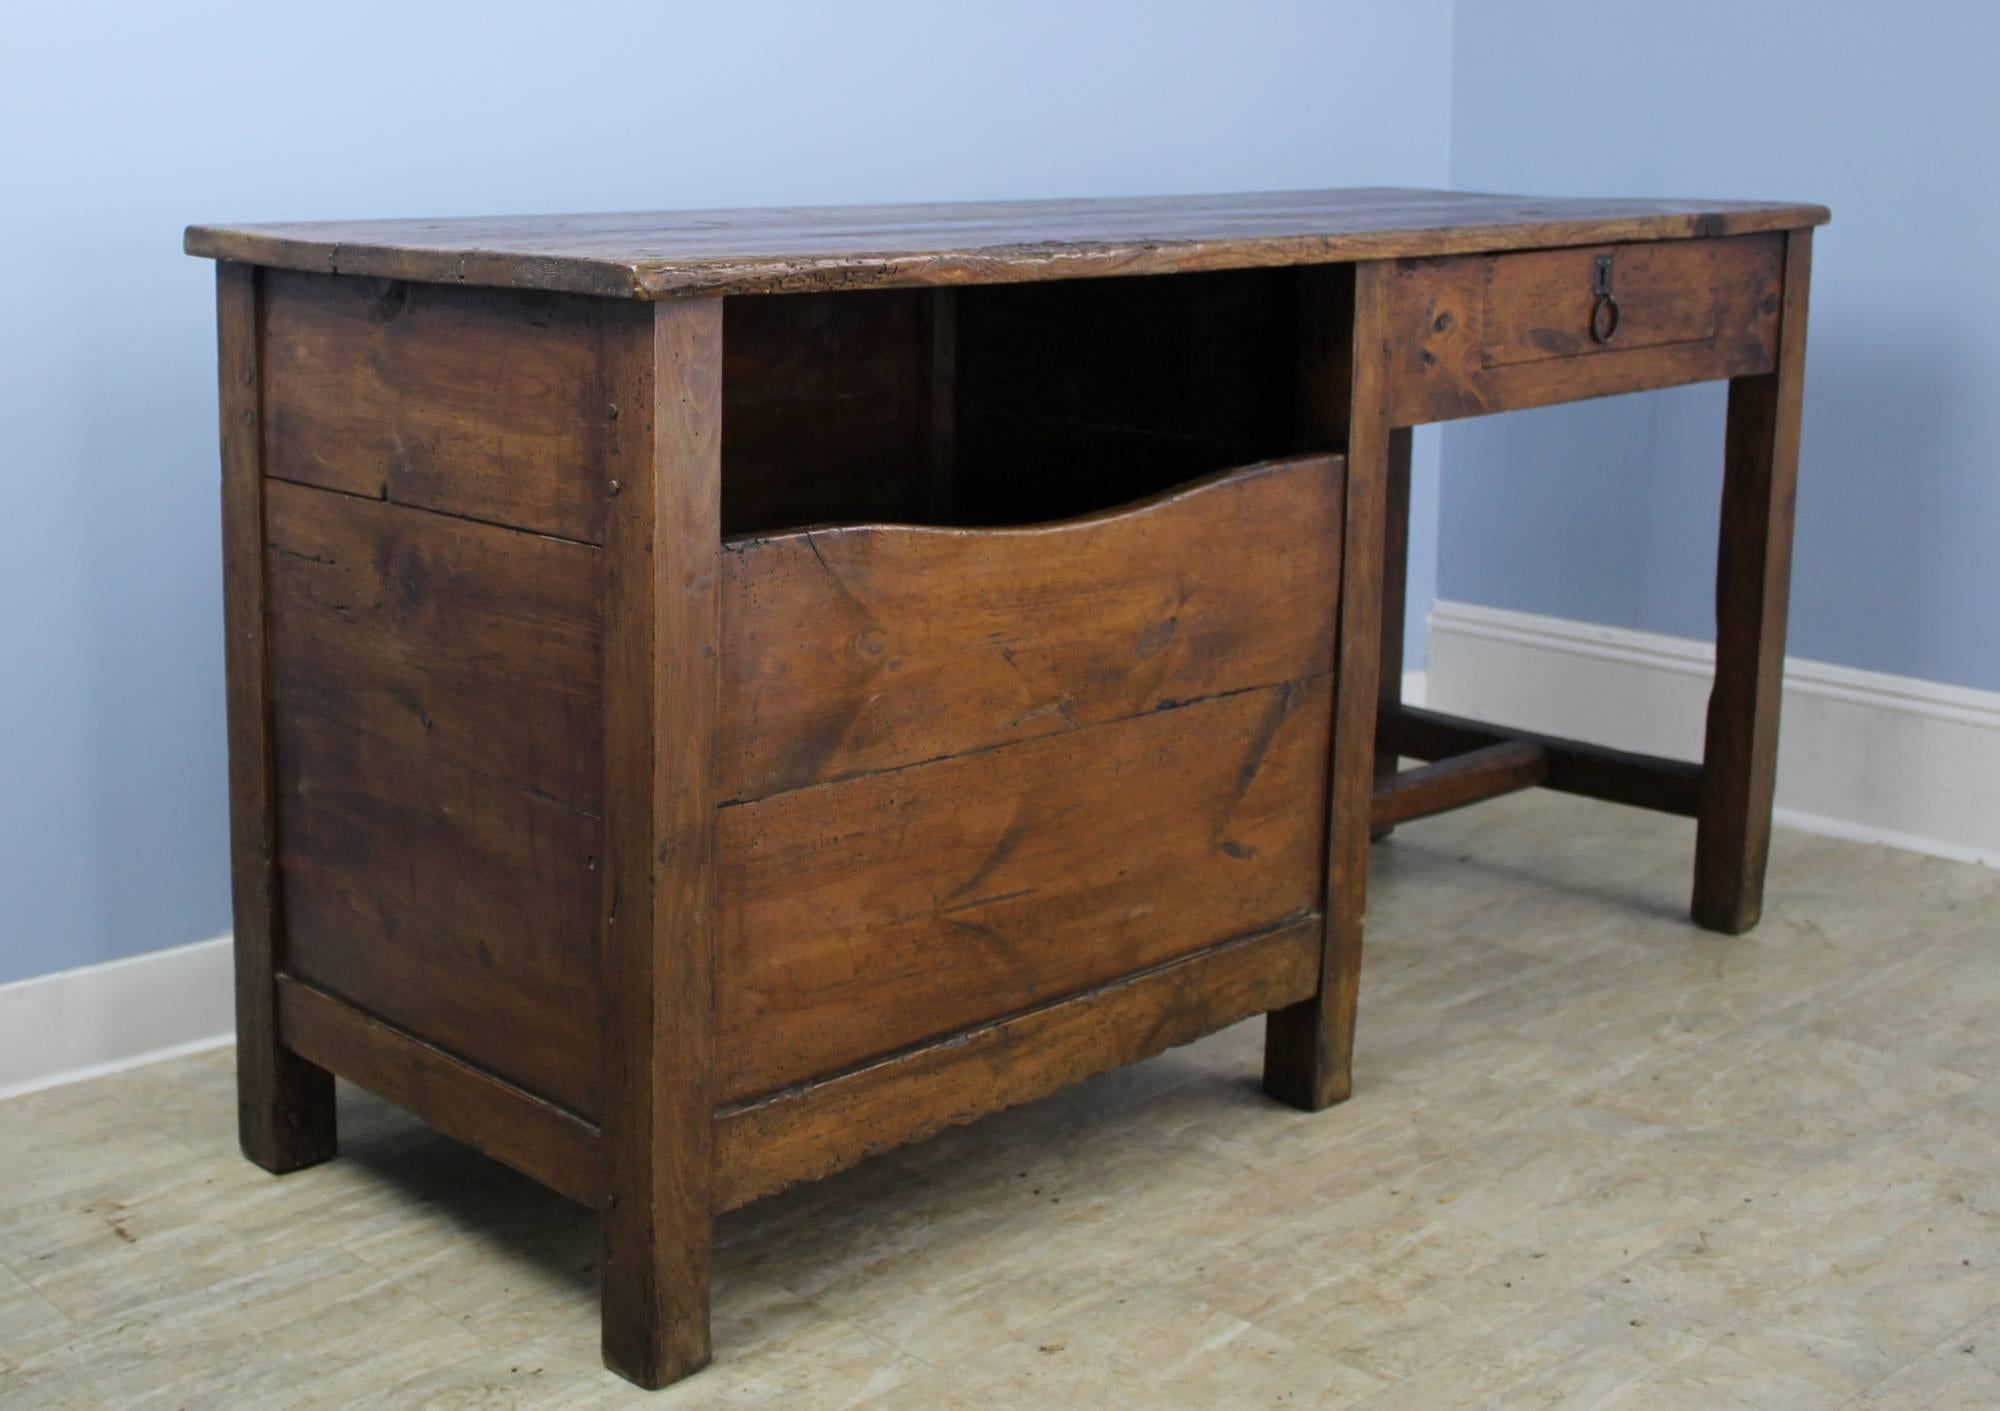 A dark pine breadseller's desk from 19th century, France. This piece is highly functional as a desk, but also has interesting features which reflect it's former life in a bakery, such as a coin slot which leads to the drawer below, and a large